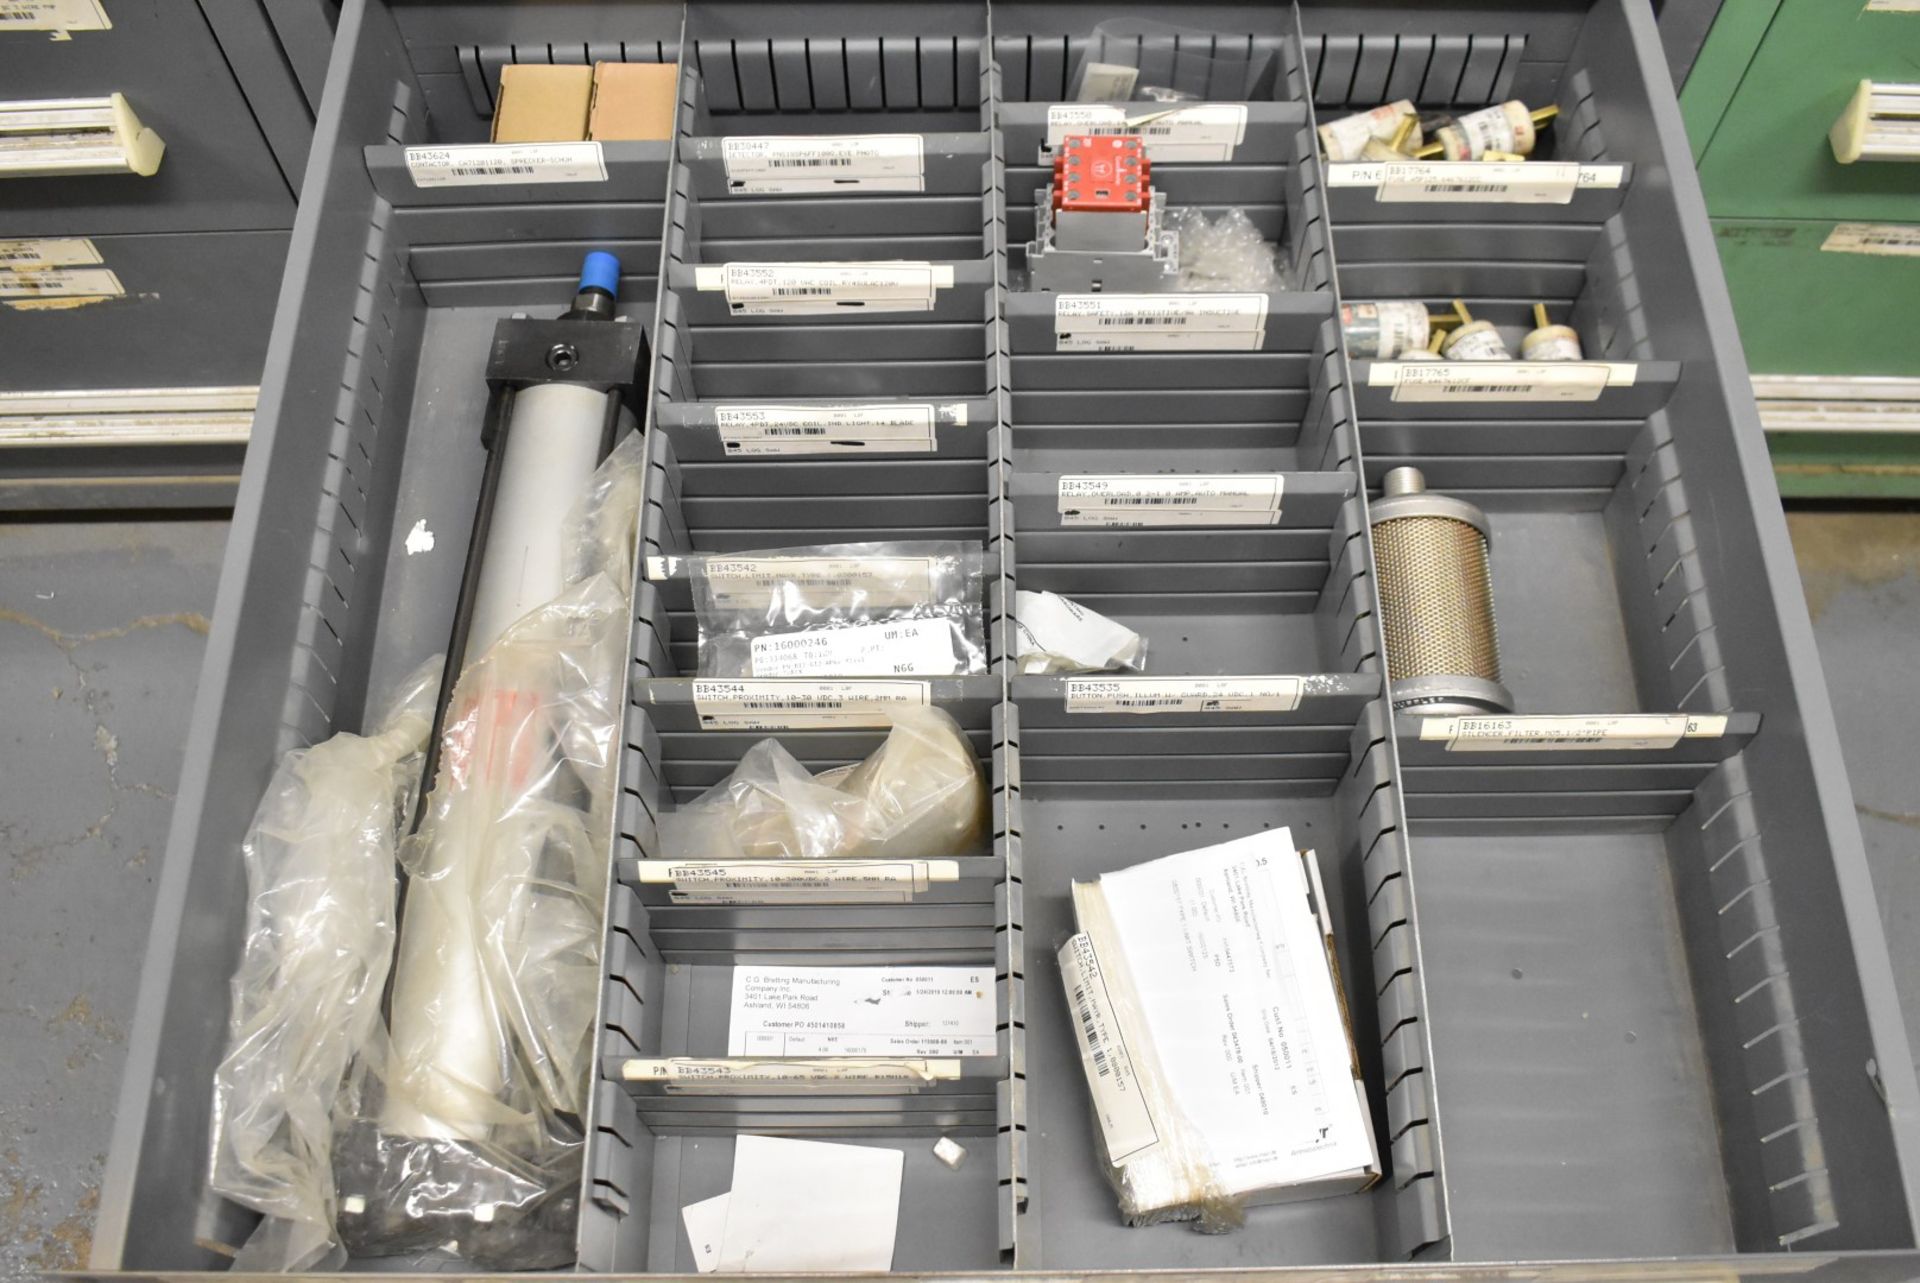 LOT/ CONTENTS OF CABINET - INCLUDING SENSOR COMPONENTS, PRINTED CIRCUIT BOARDS, GRINDING WHEELS, - Image 6 of 6